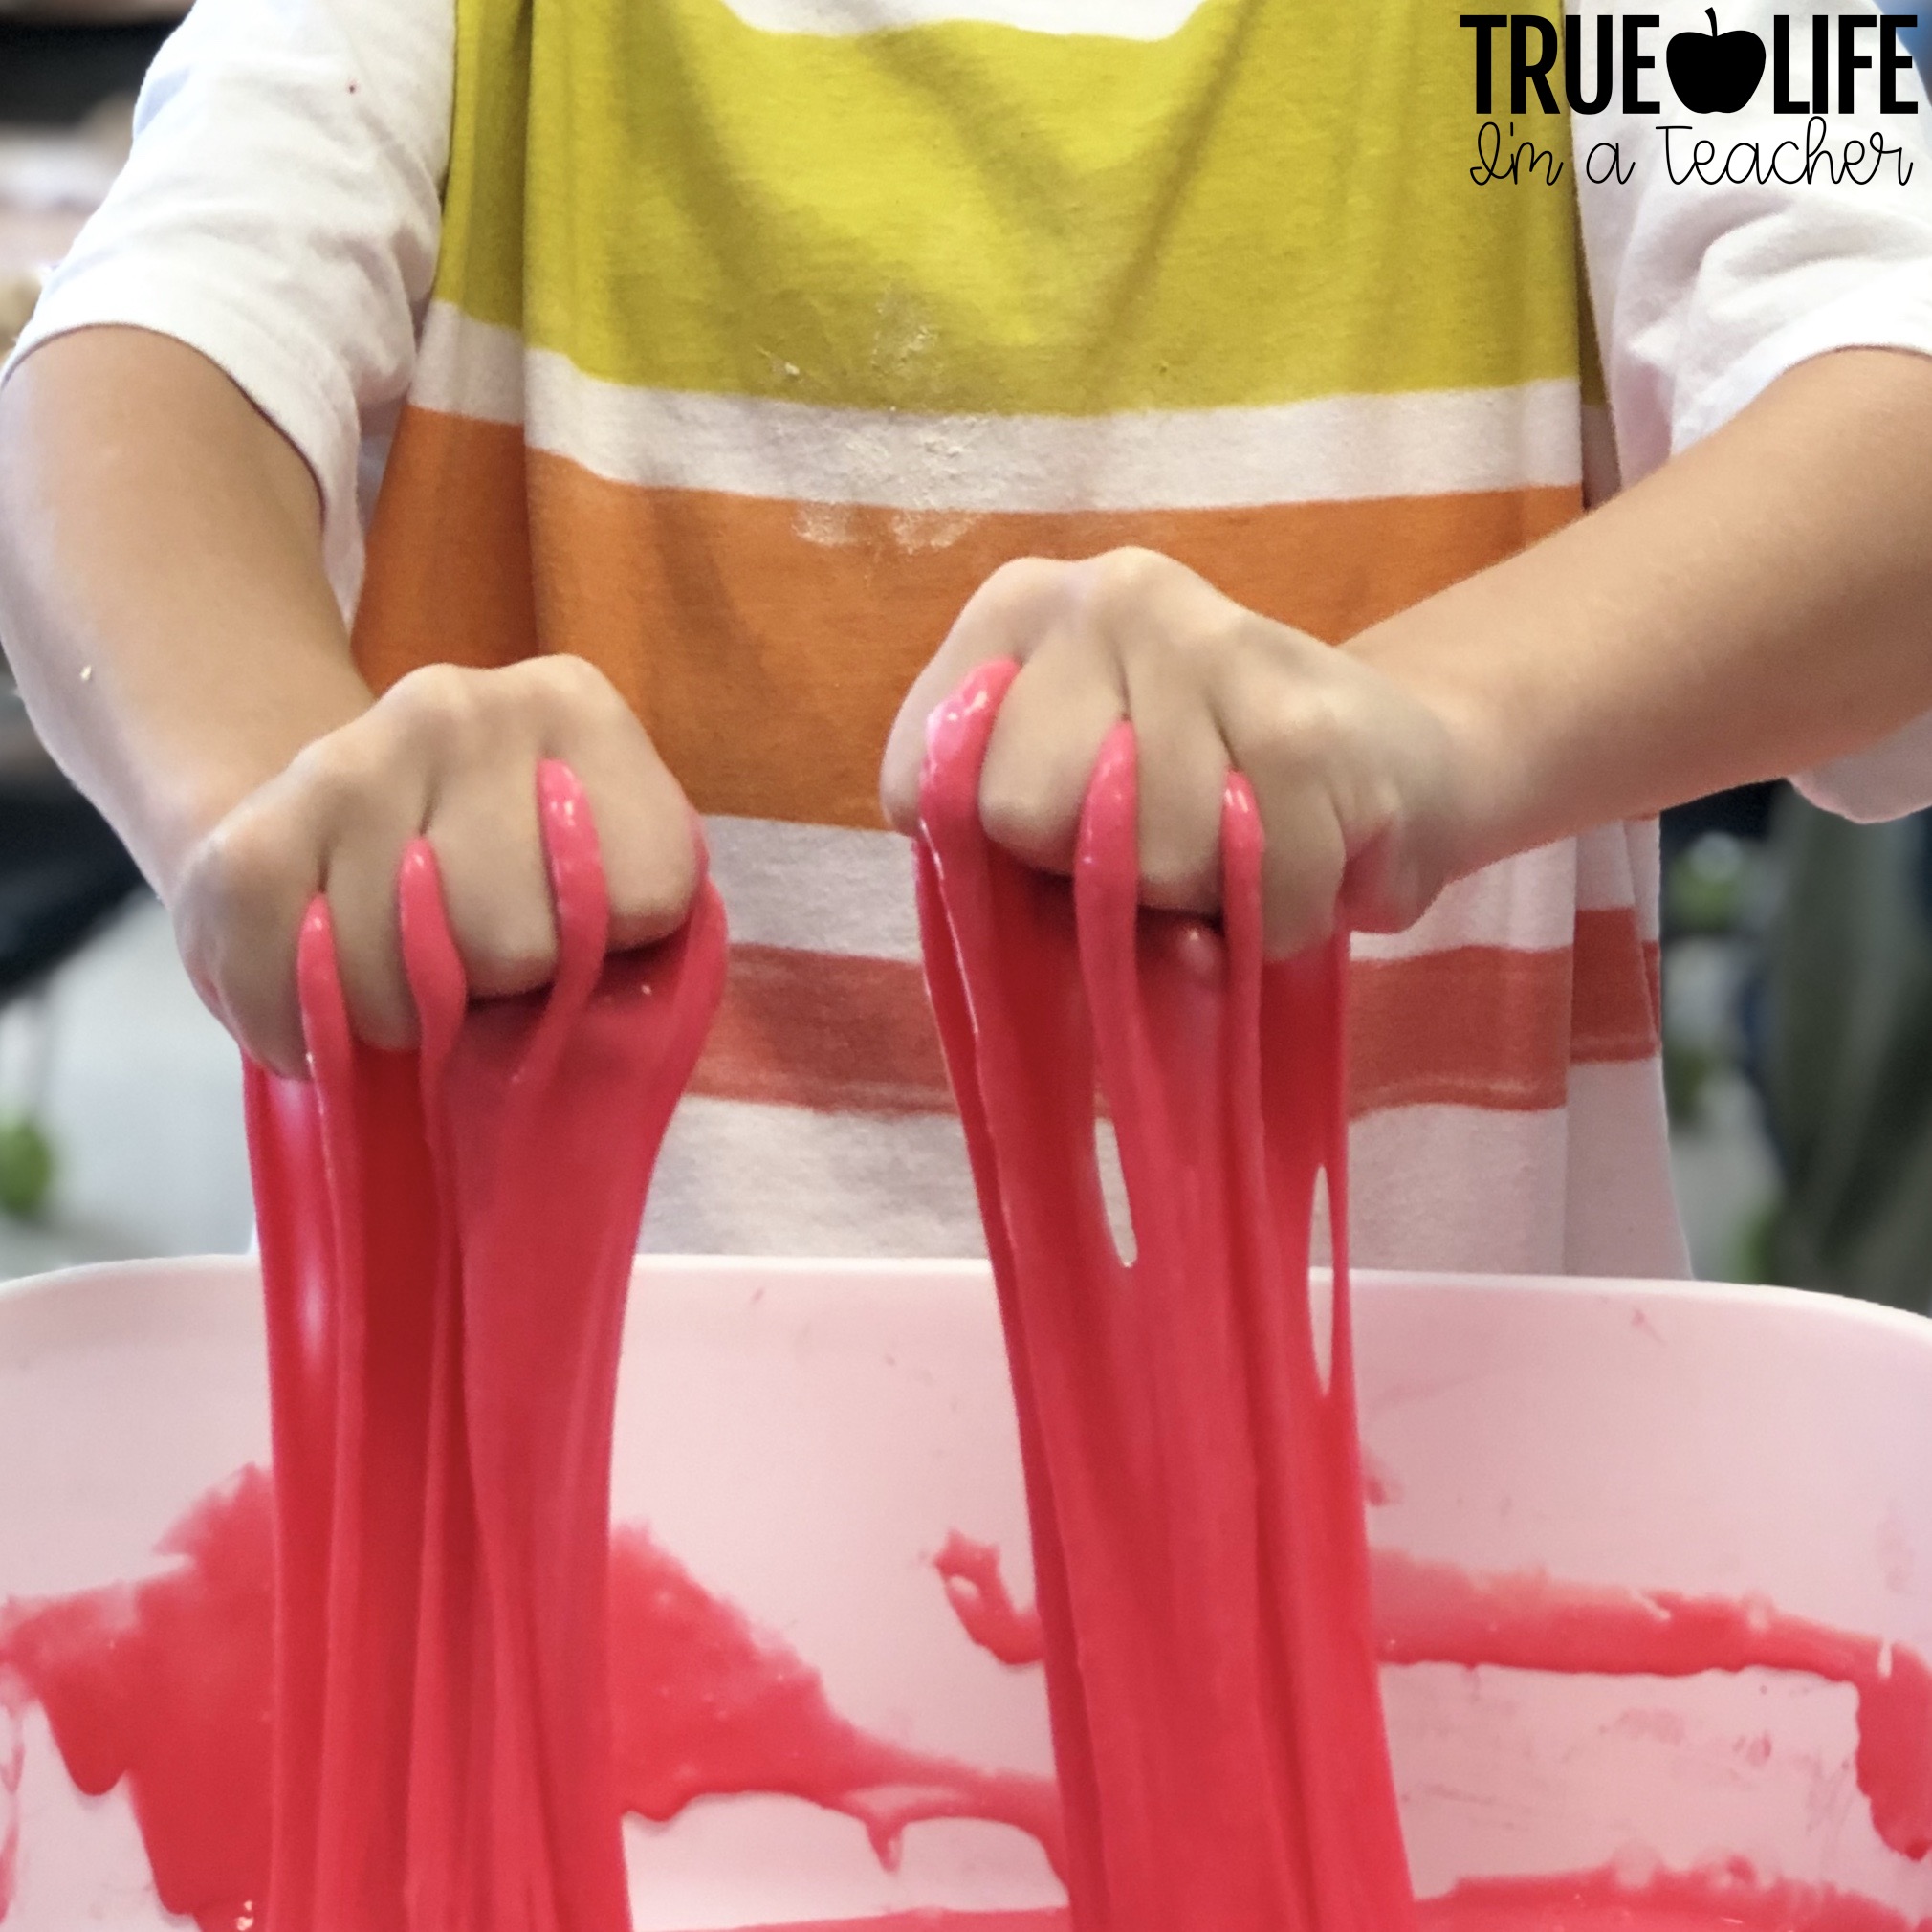 Easiest classroom slime. Classroom tested, kid-, and teacher-approved!